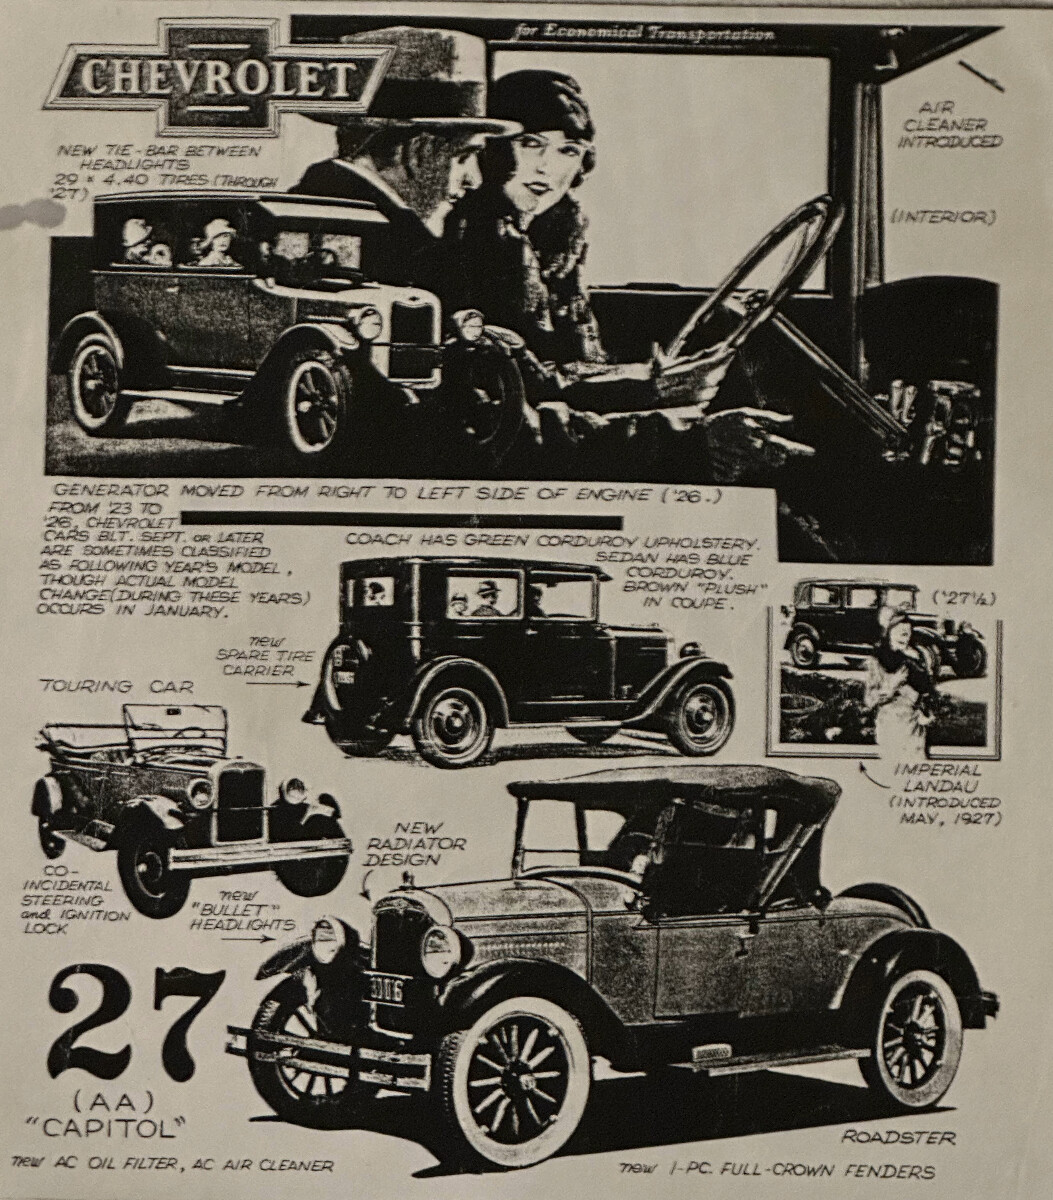 '27 Chevy Roadster ad